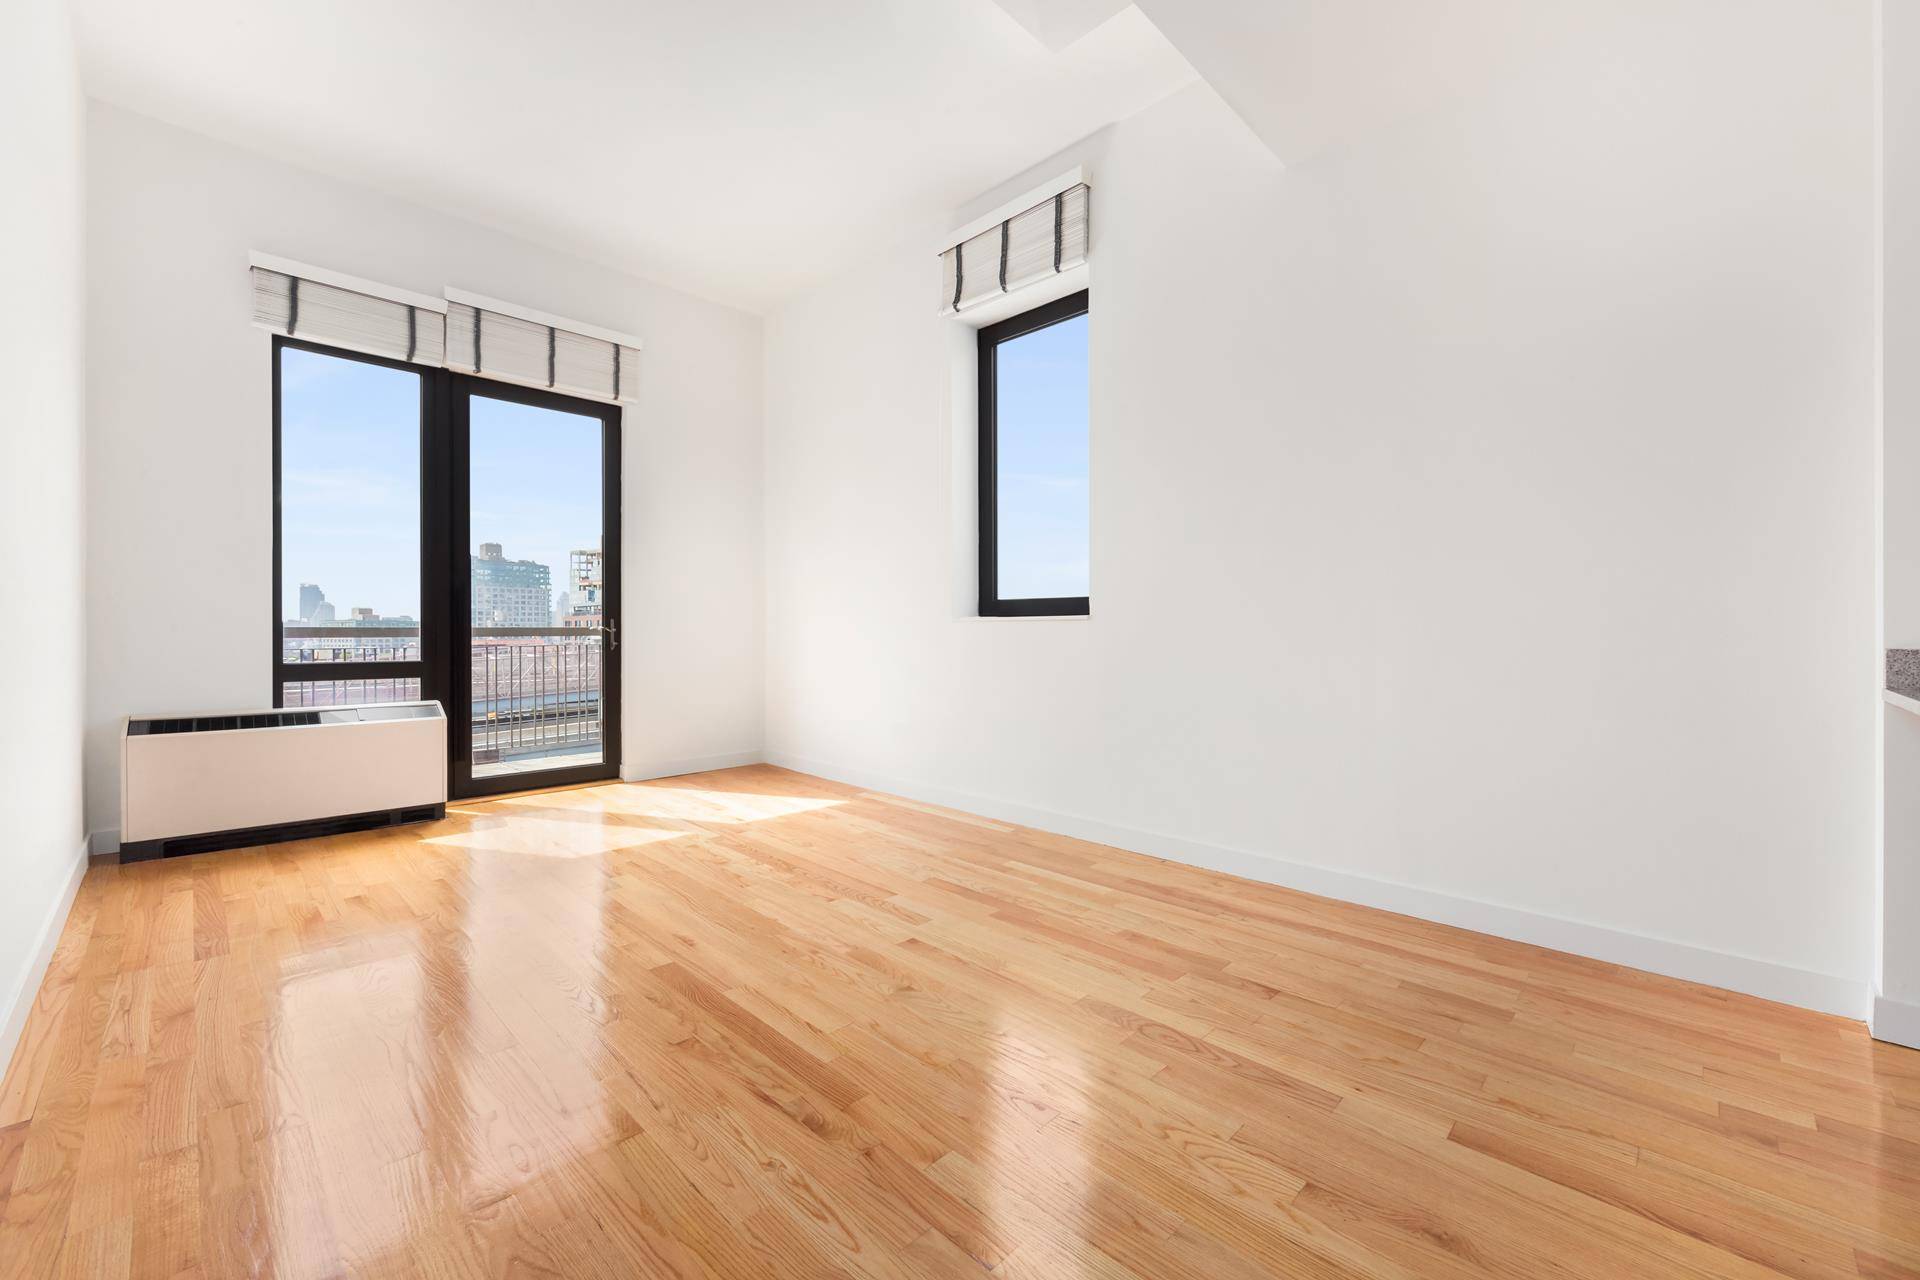 Rent Stabilized ! ! ! ! Upon entering this spacious one bedroom one bathroom at the Wythe Confectionary, you are immediately greeted by large windows coupled with 12' ceilings which ...